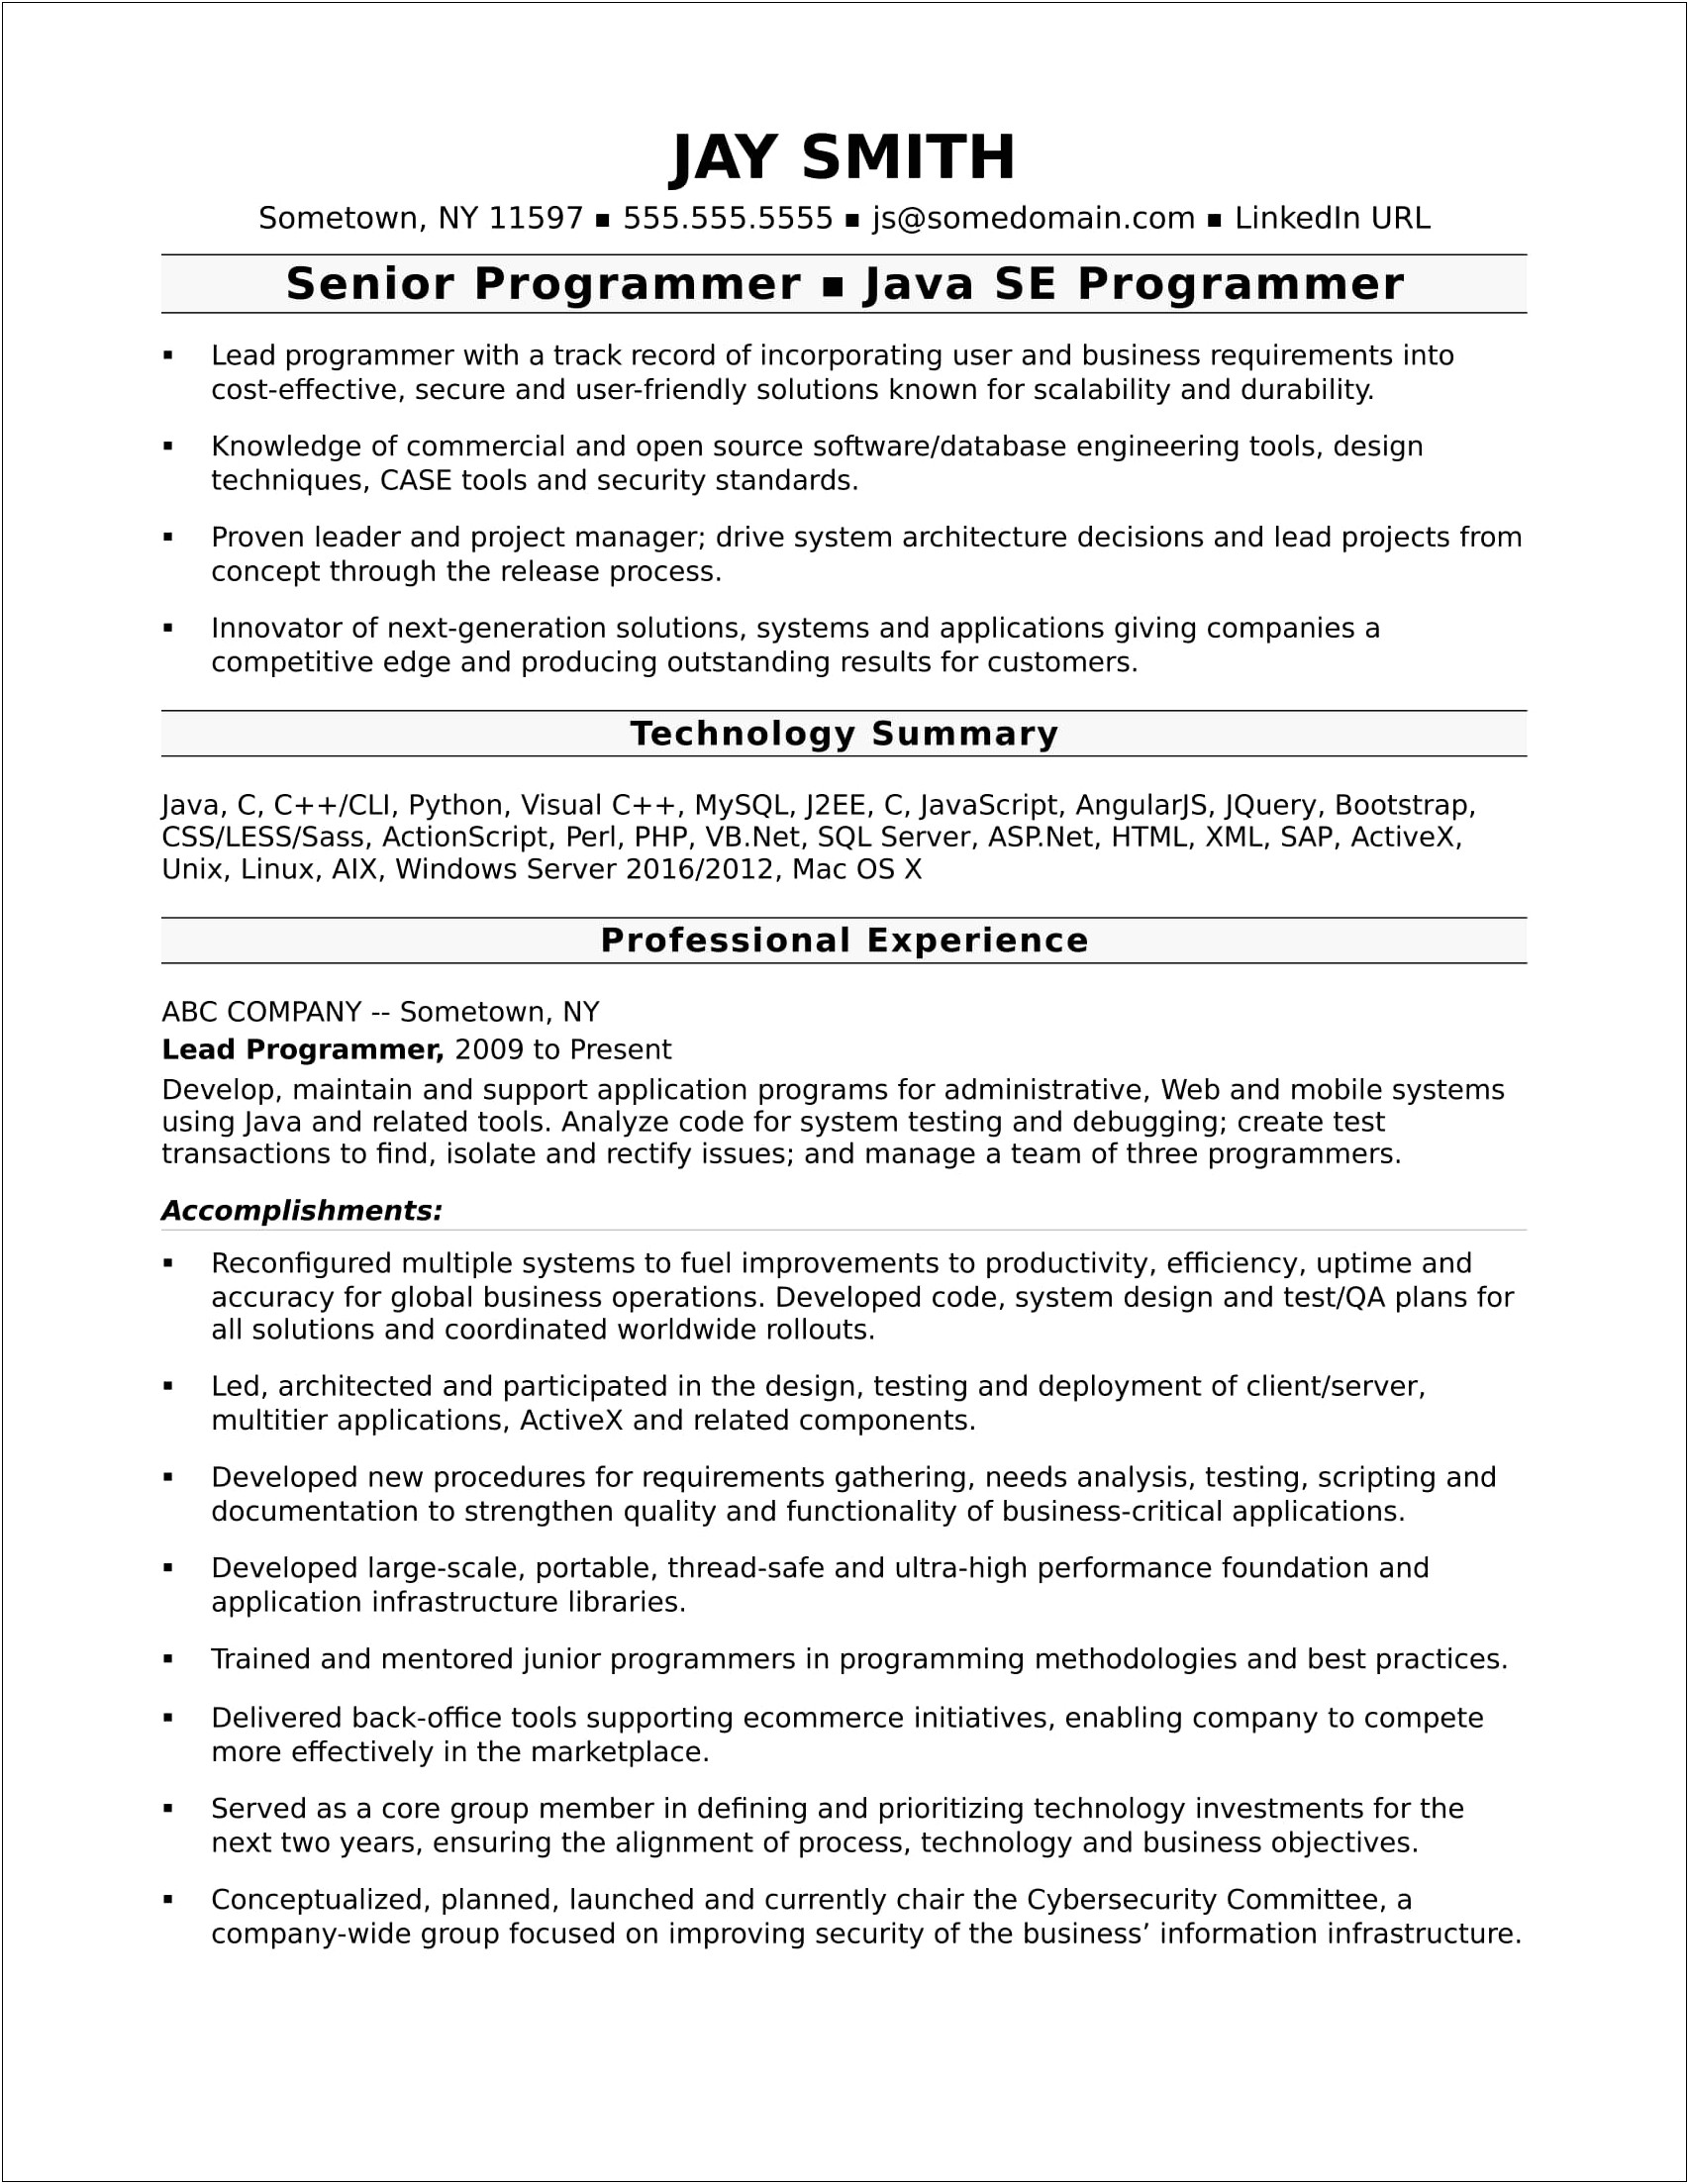 Software Experience Resume Format Sample